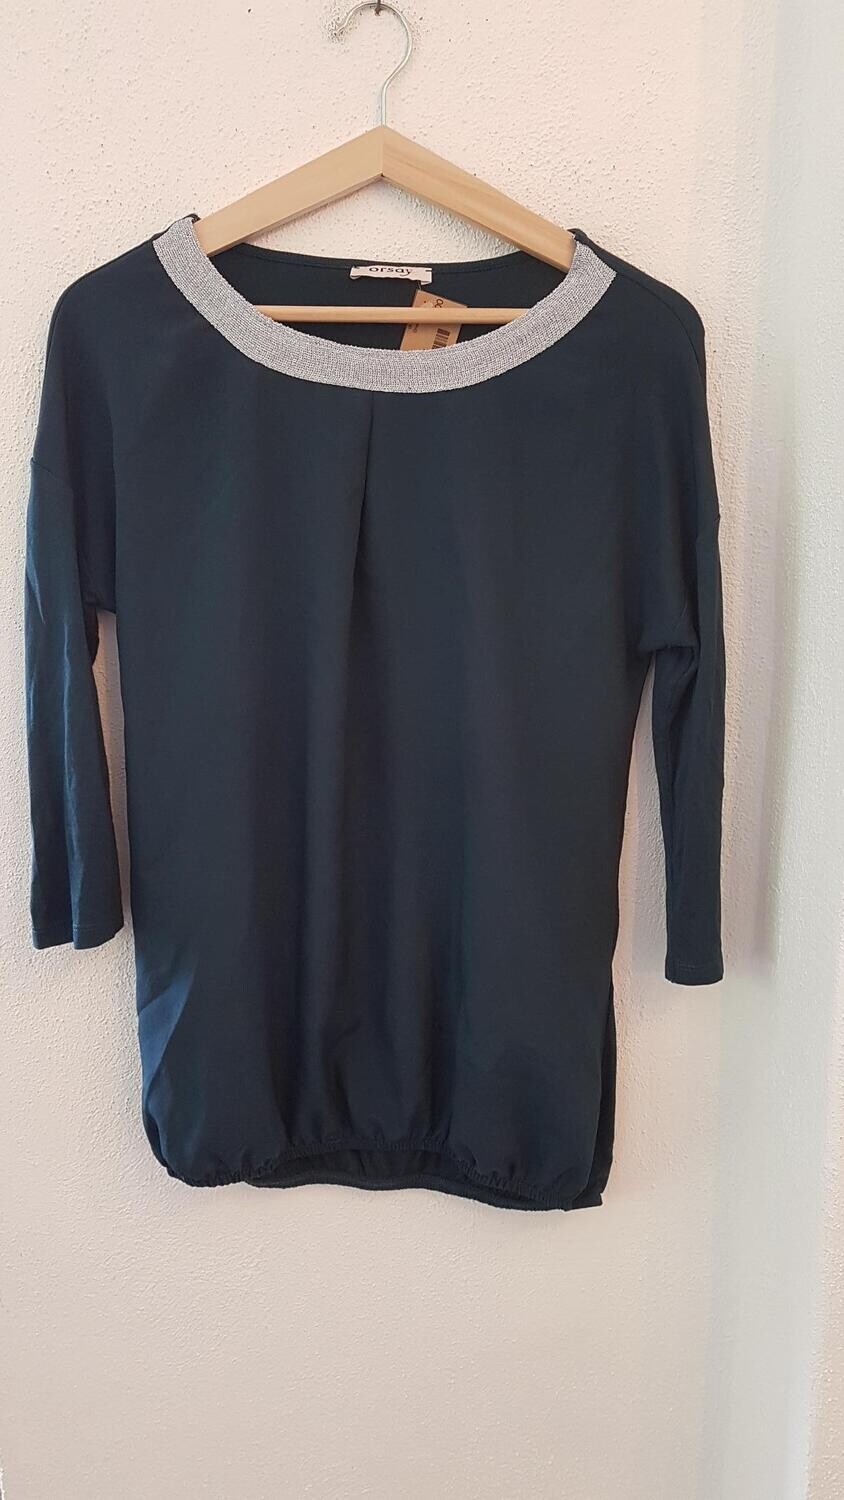 Bluse "Orsay" Gr. XS